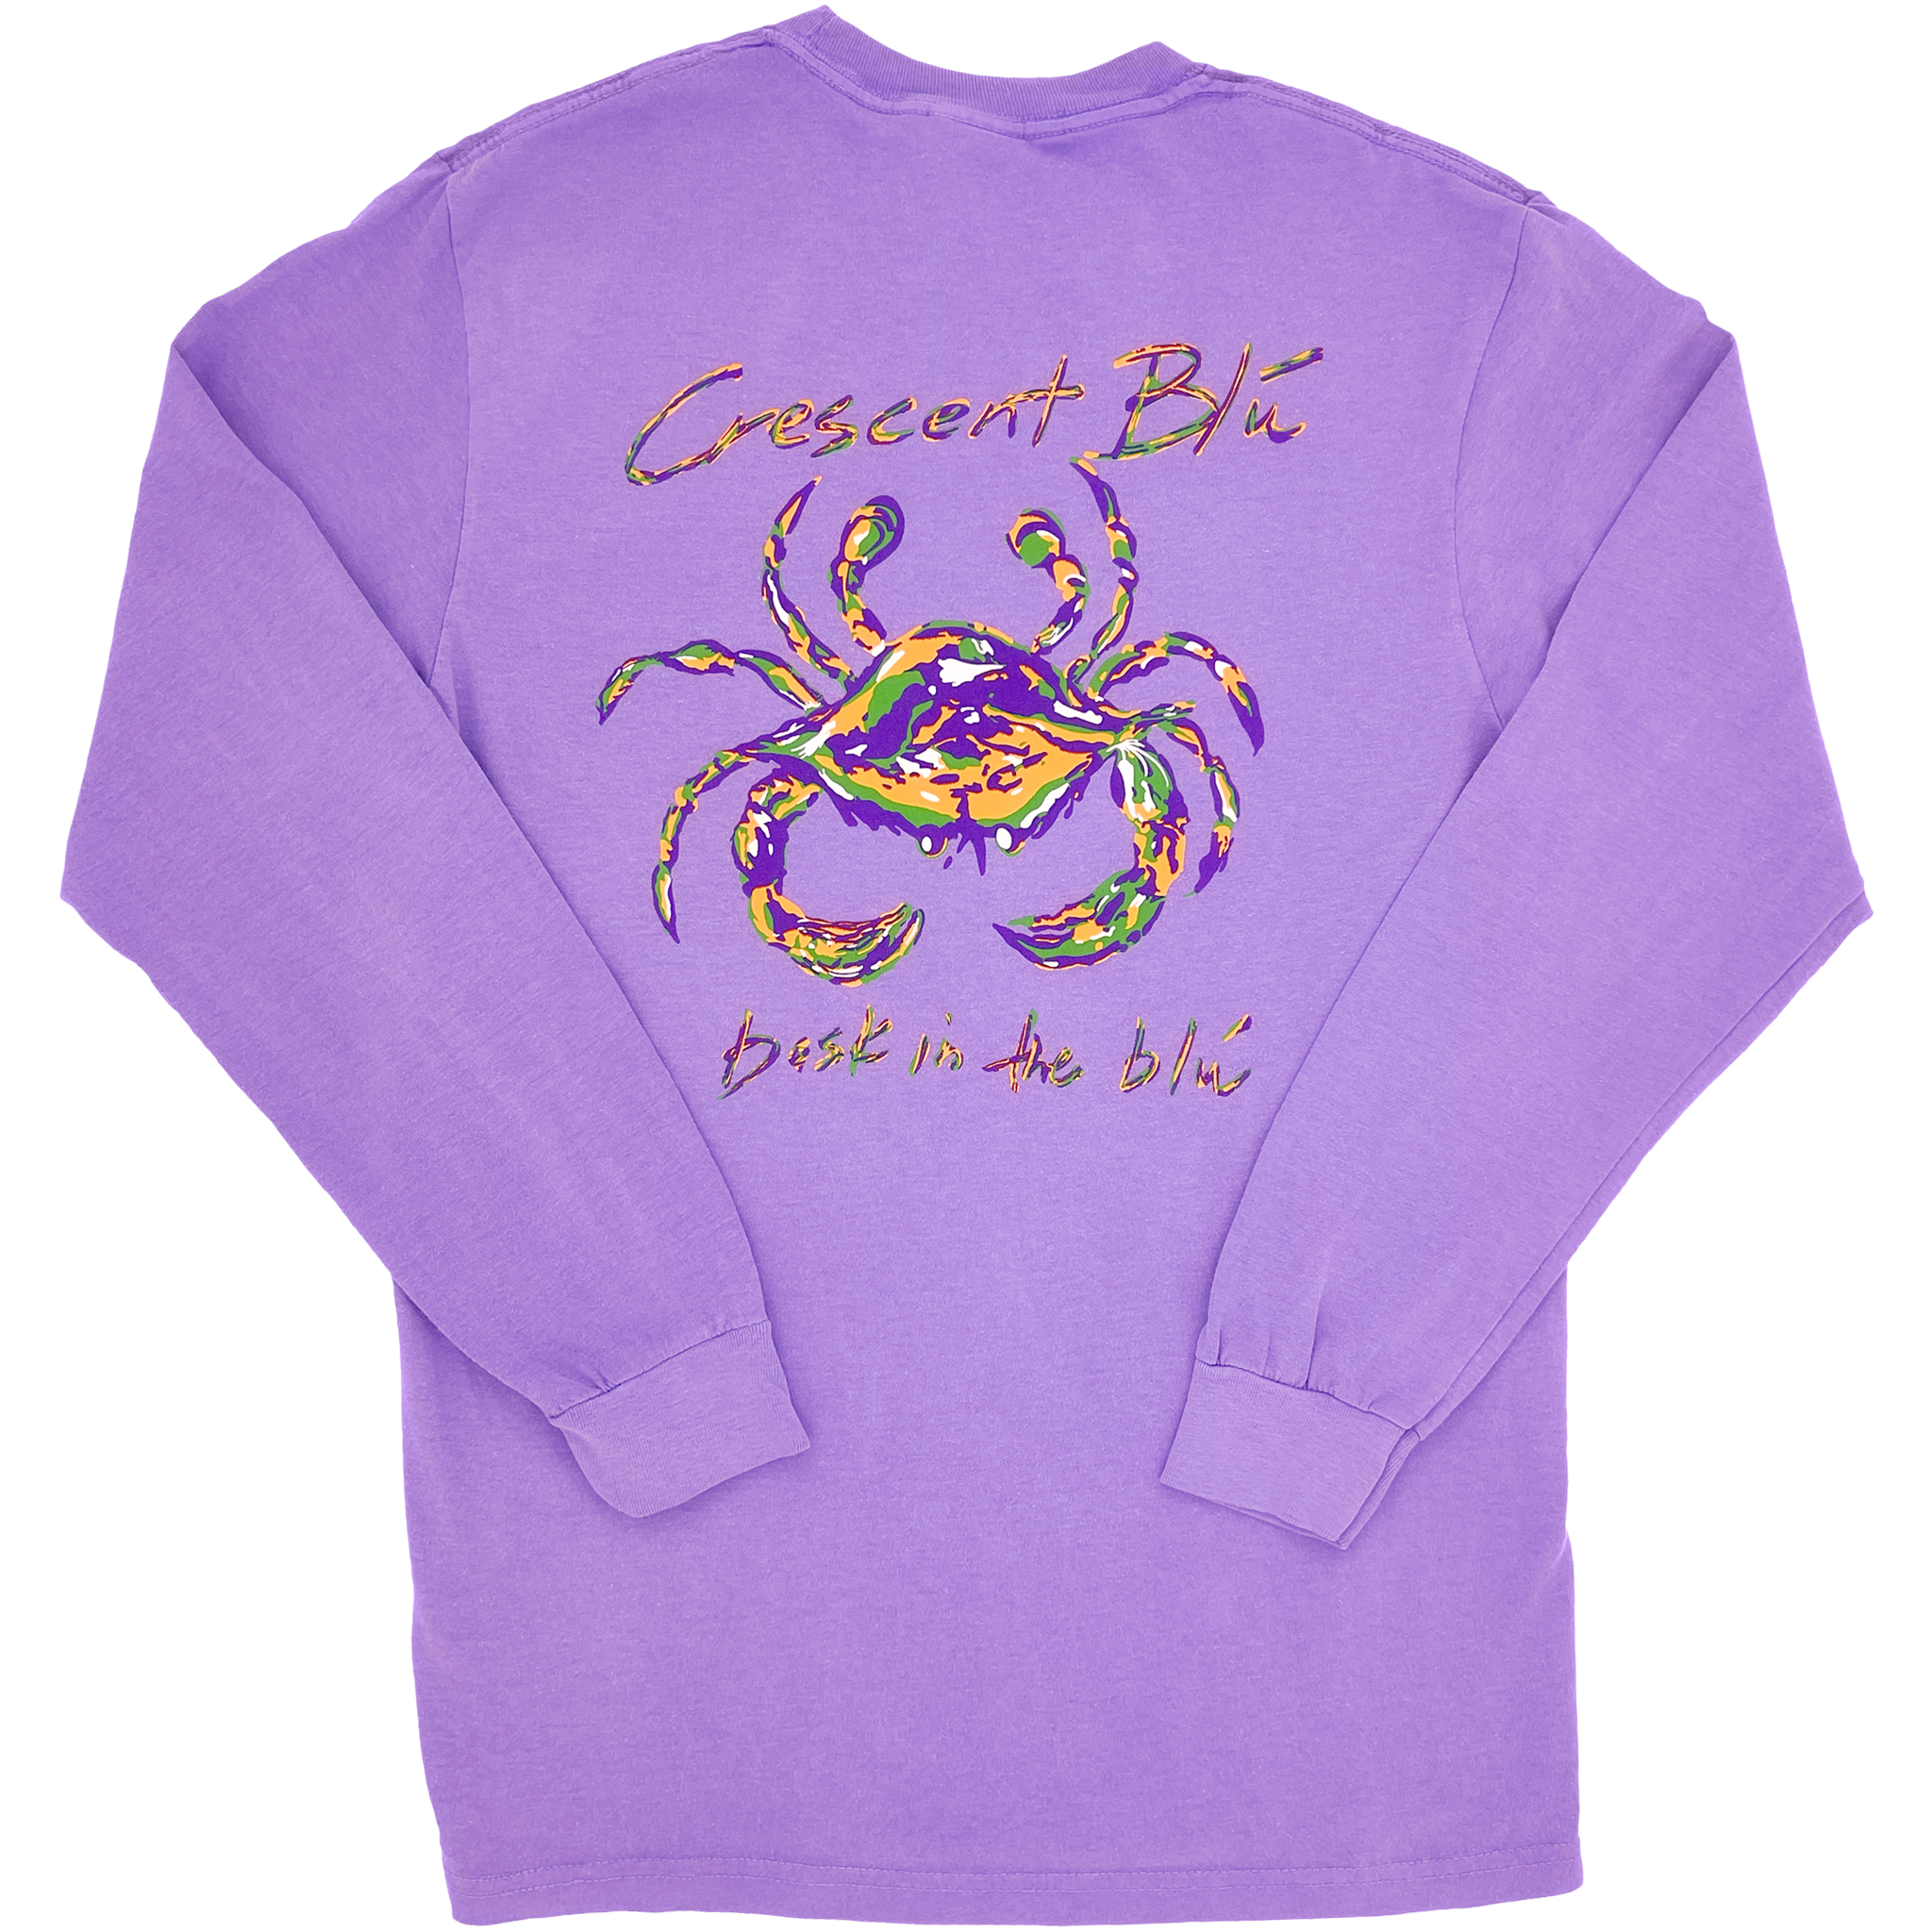 A Mardi Gras Crab print on the back of a Violet long sleet tee with ribbed cuffs on the sleeves.